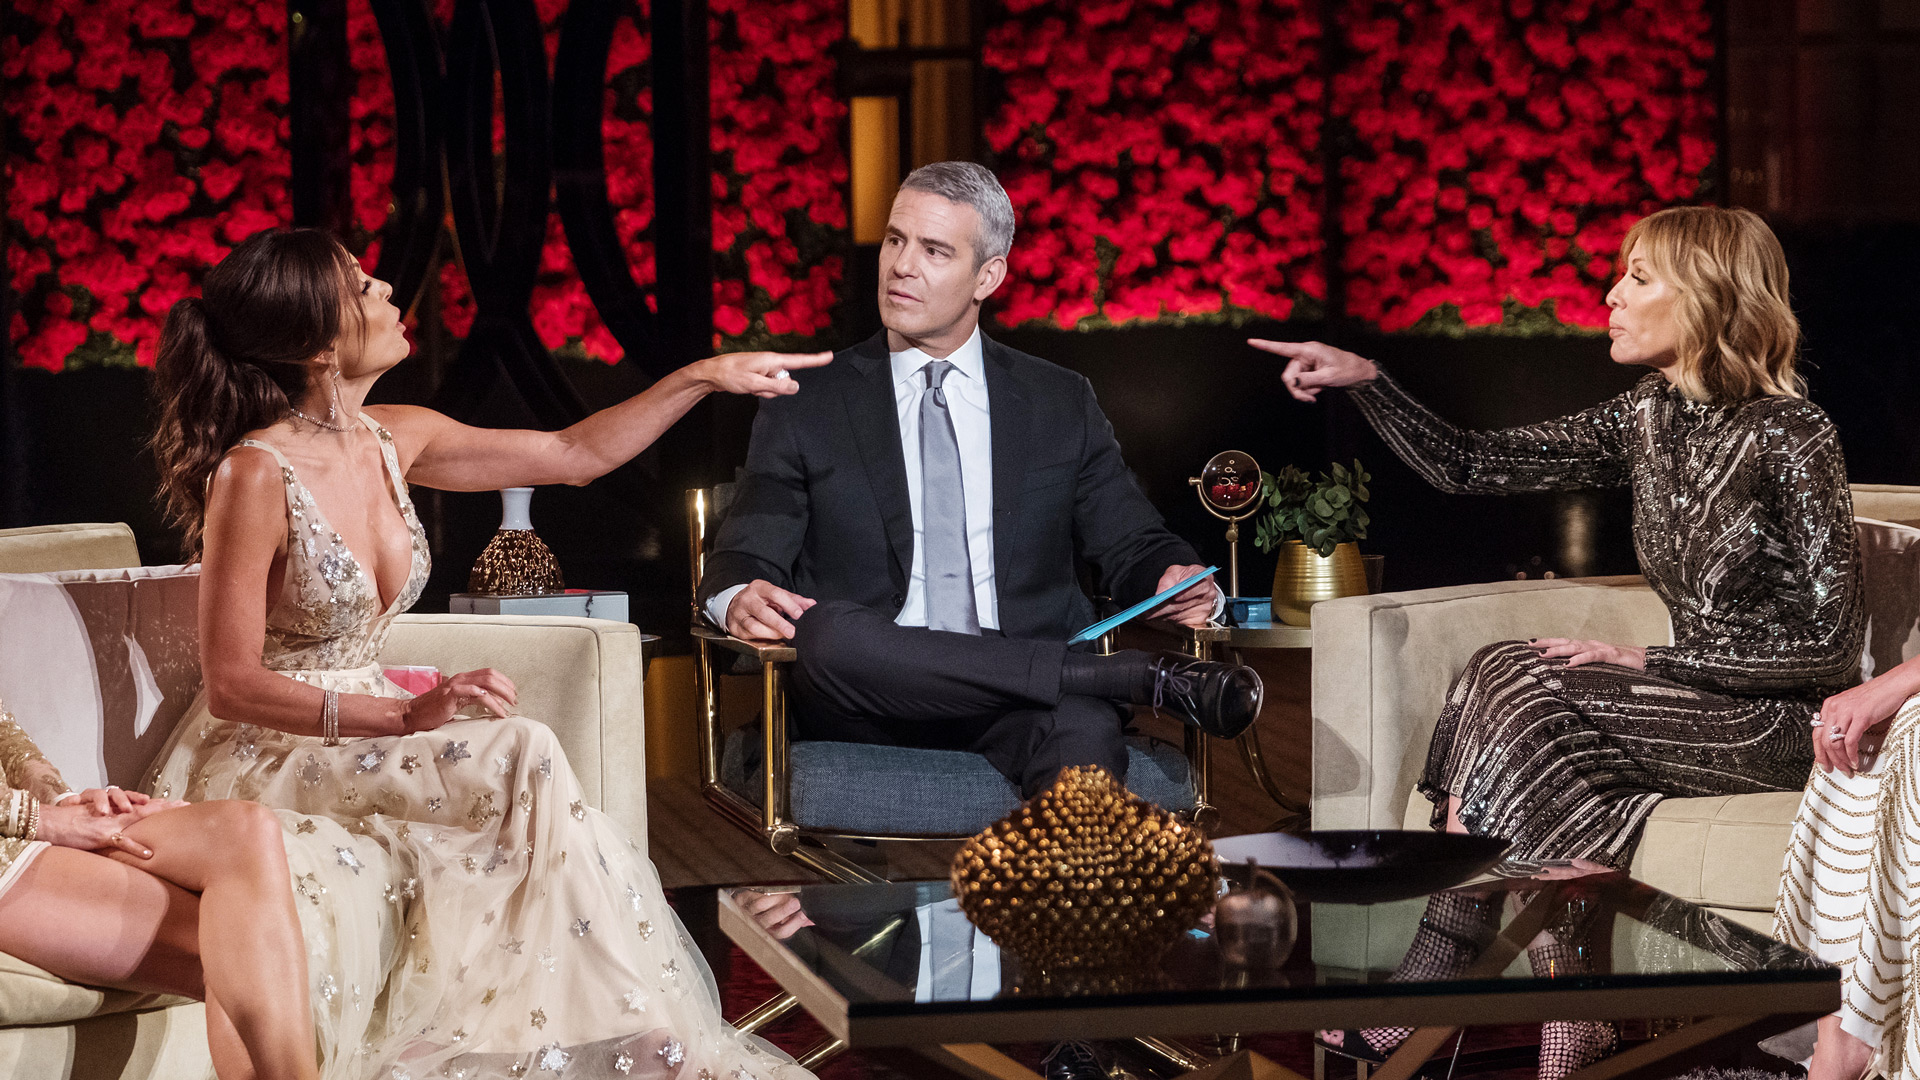 RHONY The Real Housewives of New York City S10E21 saison 10 épisode 21 Reunion Part 2